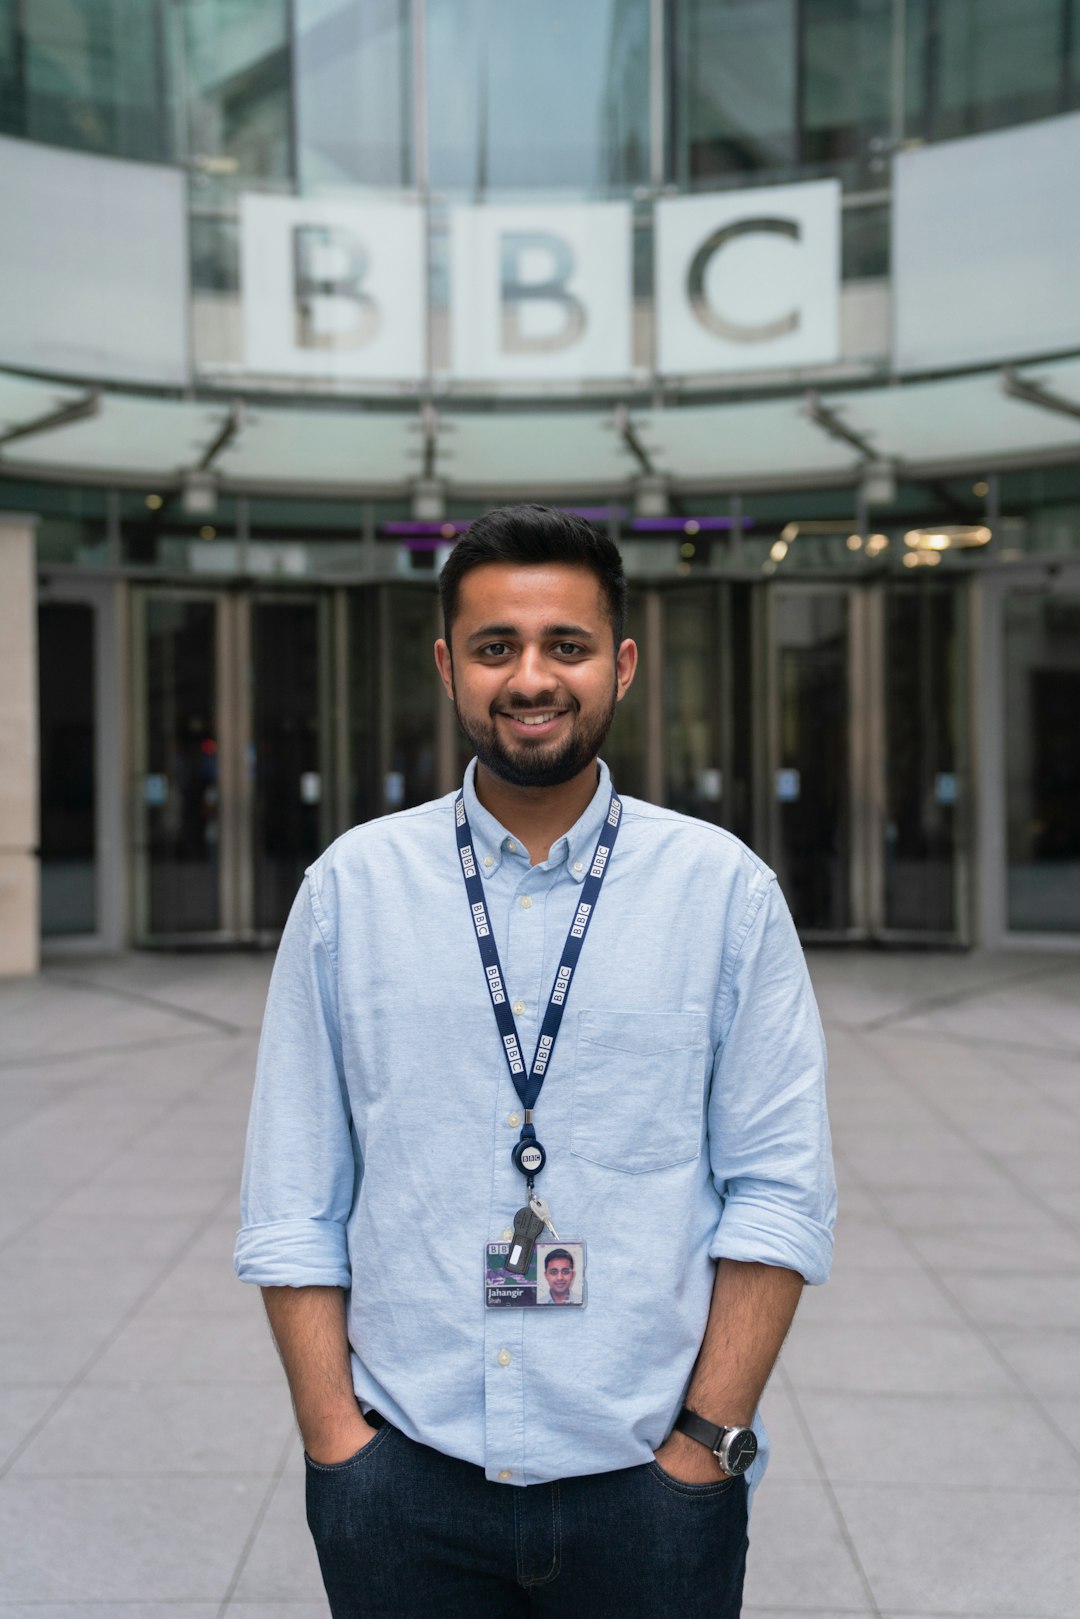 Male broadcast engineer outside the BBC